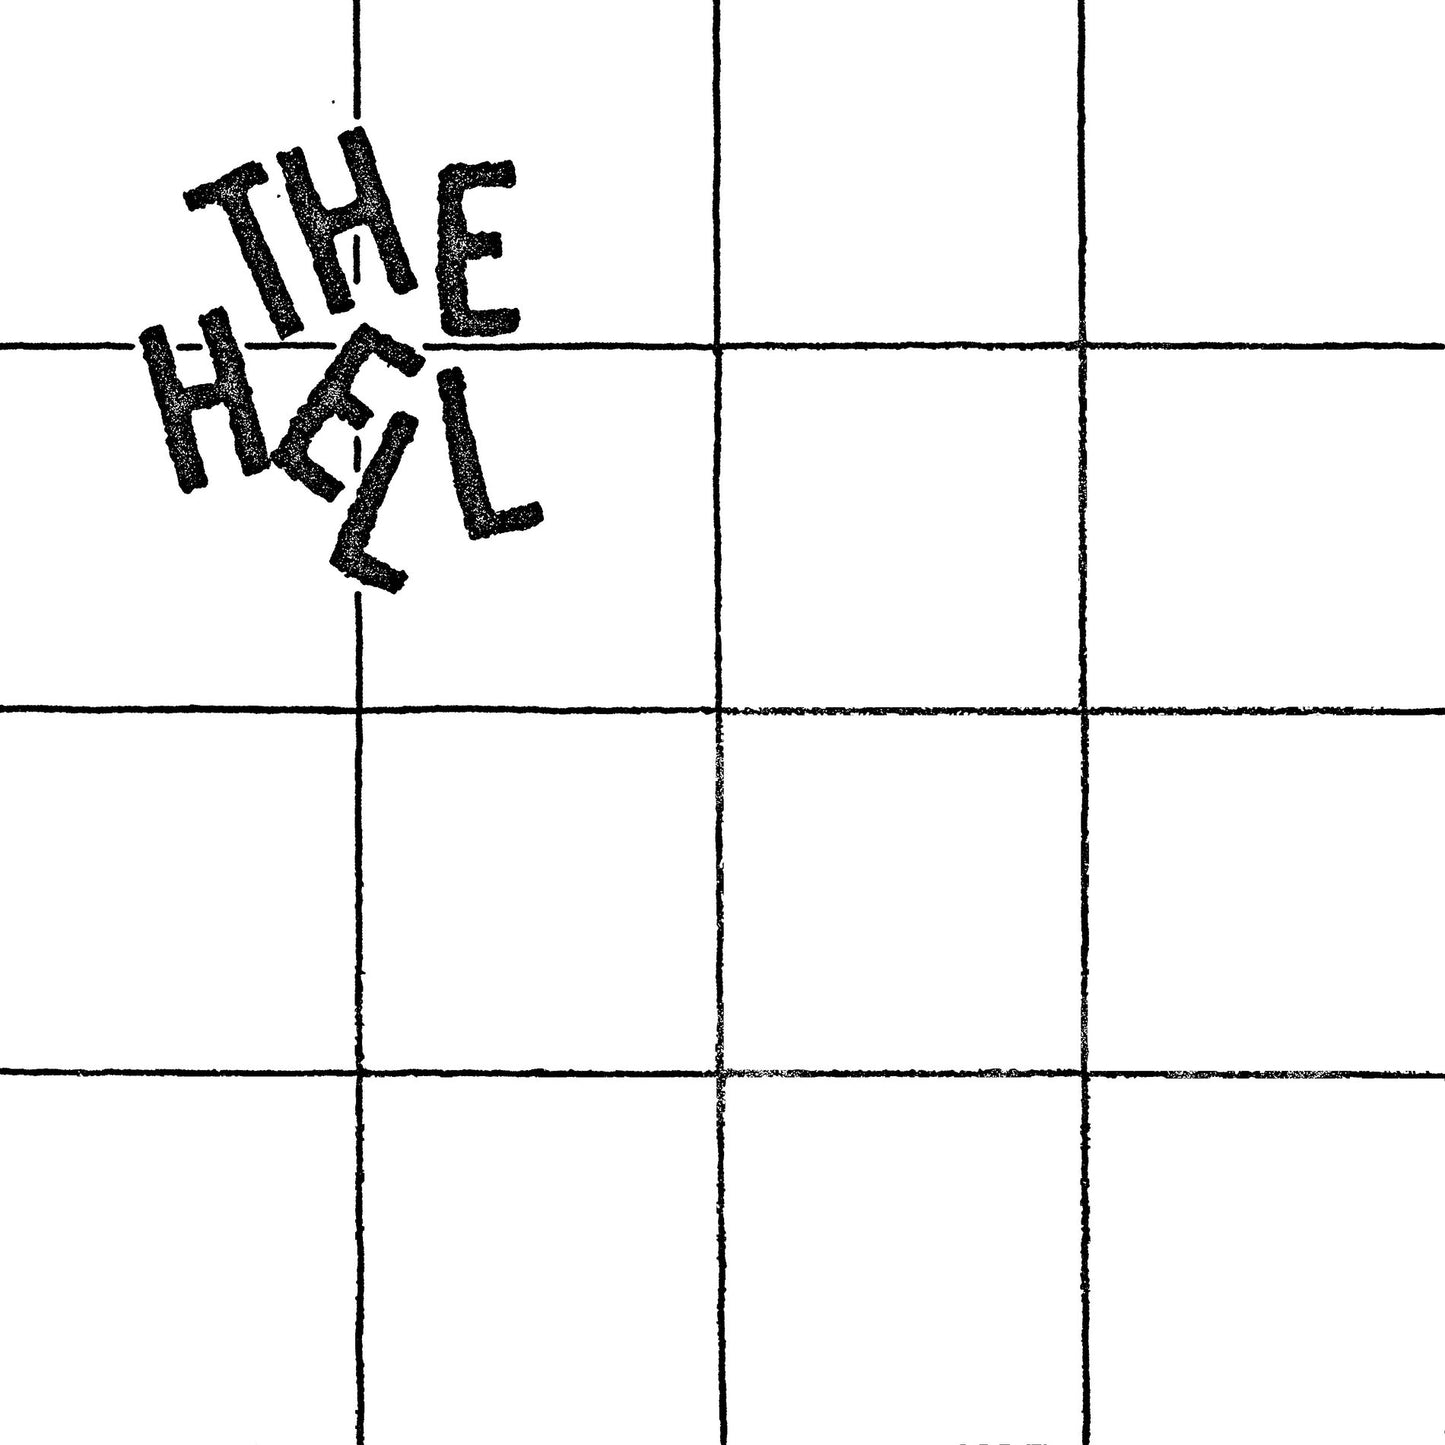 The Hell - "S/T" 12-inch